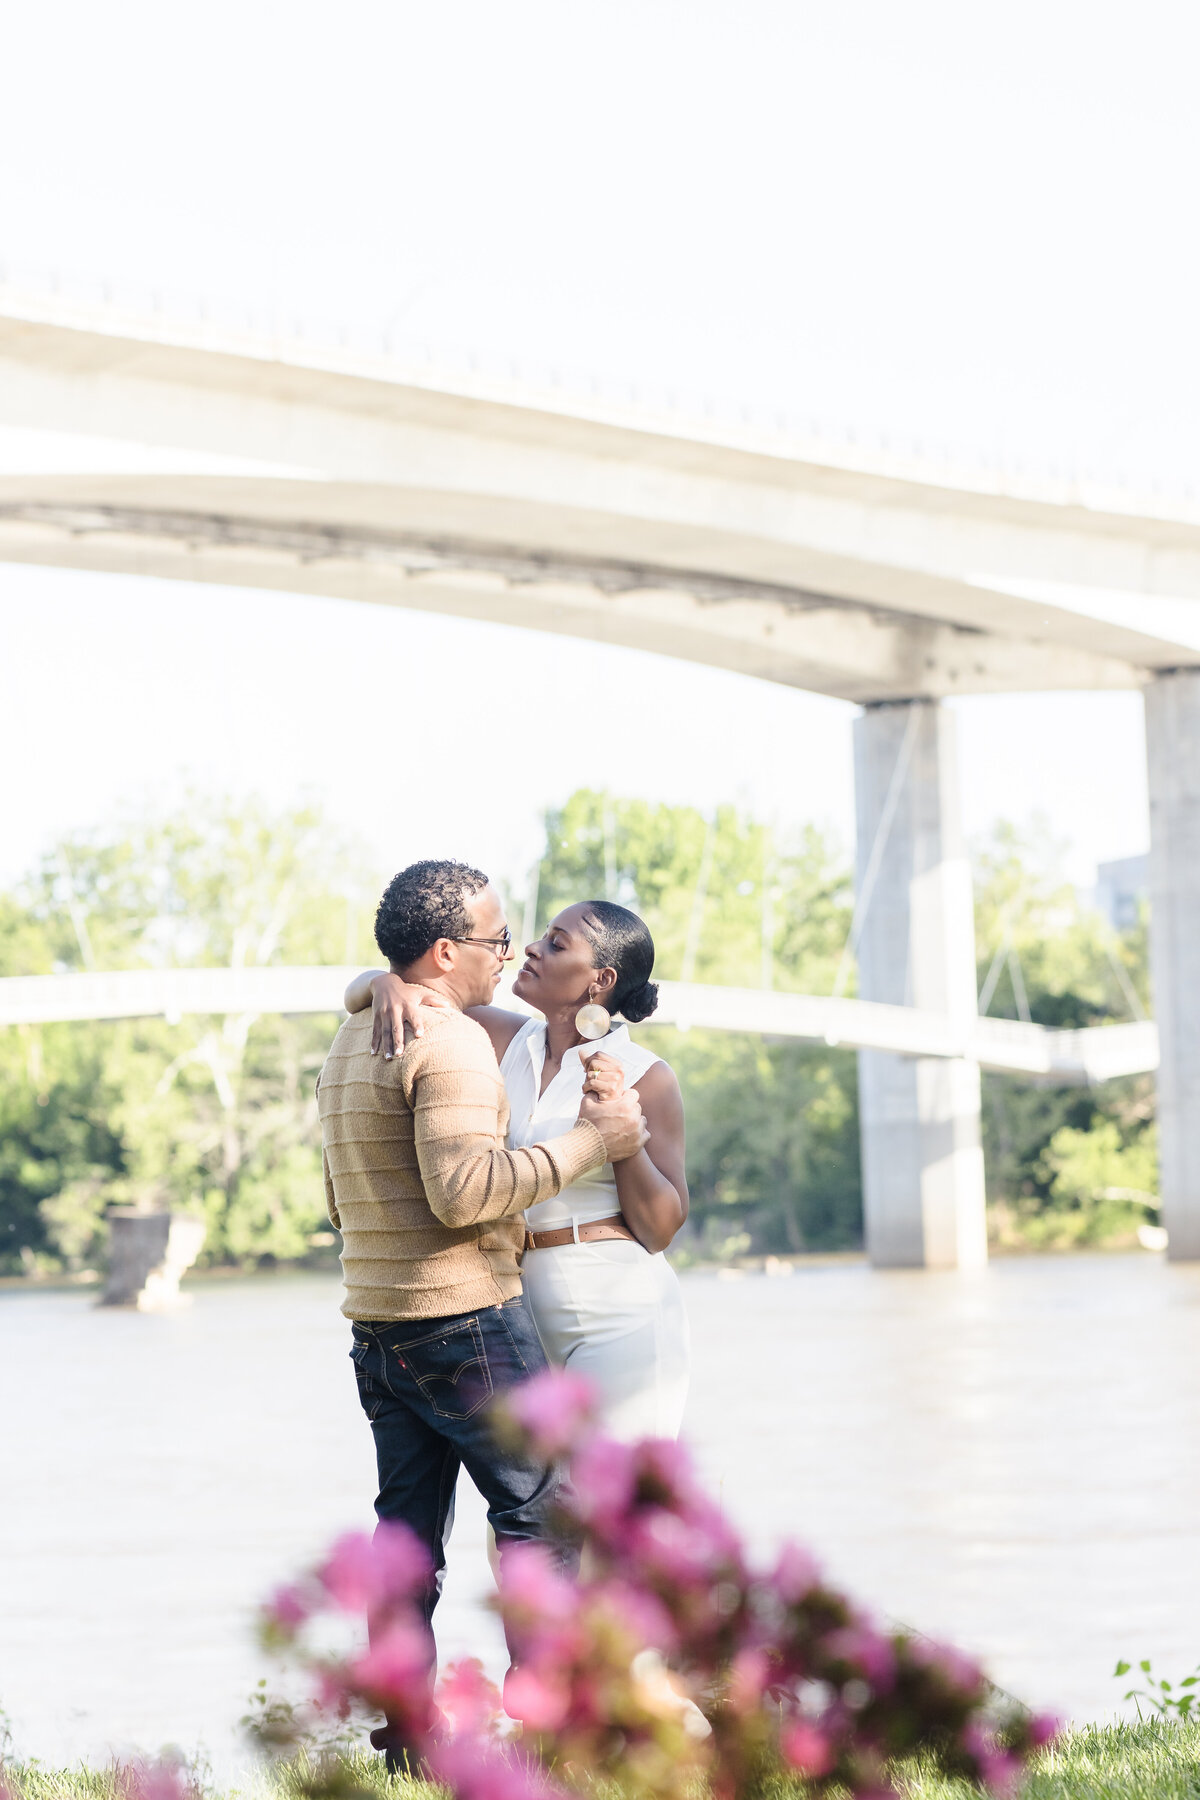 man and woman embrace under bridge by river